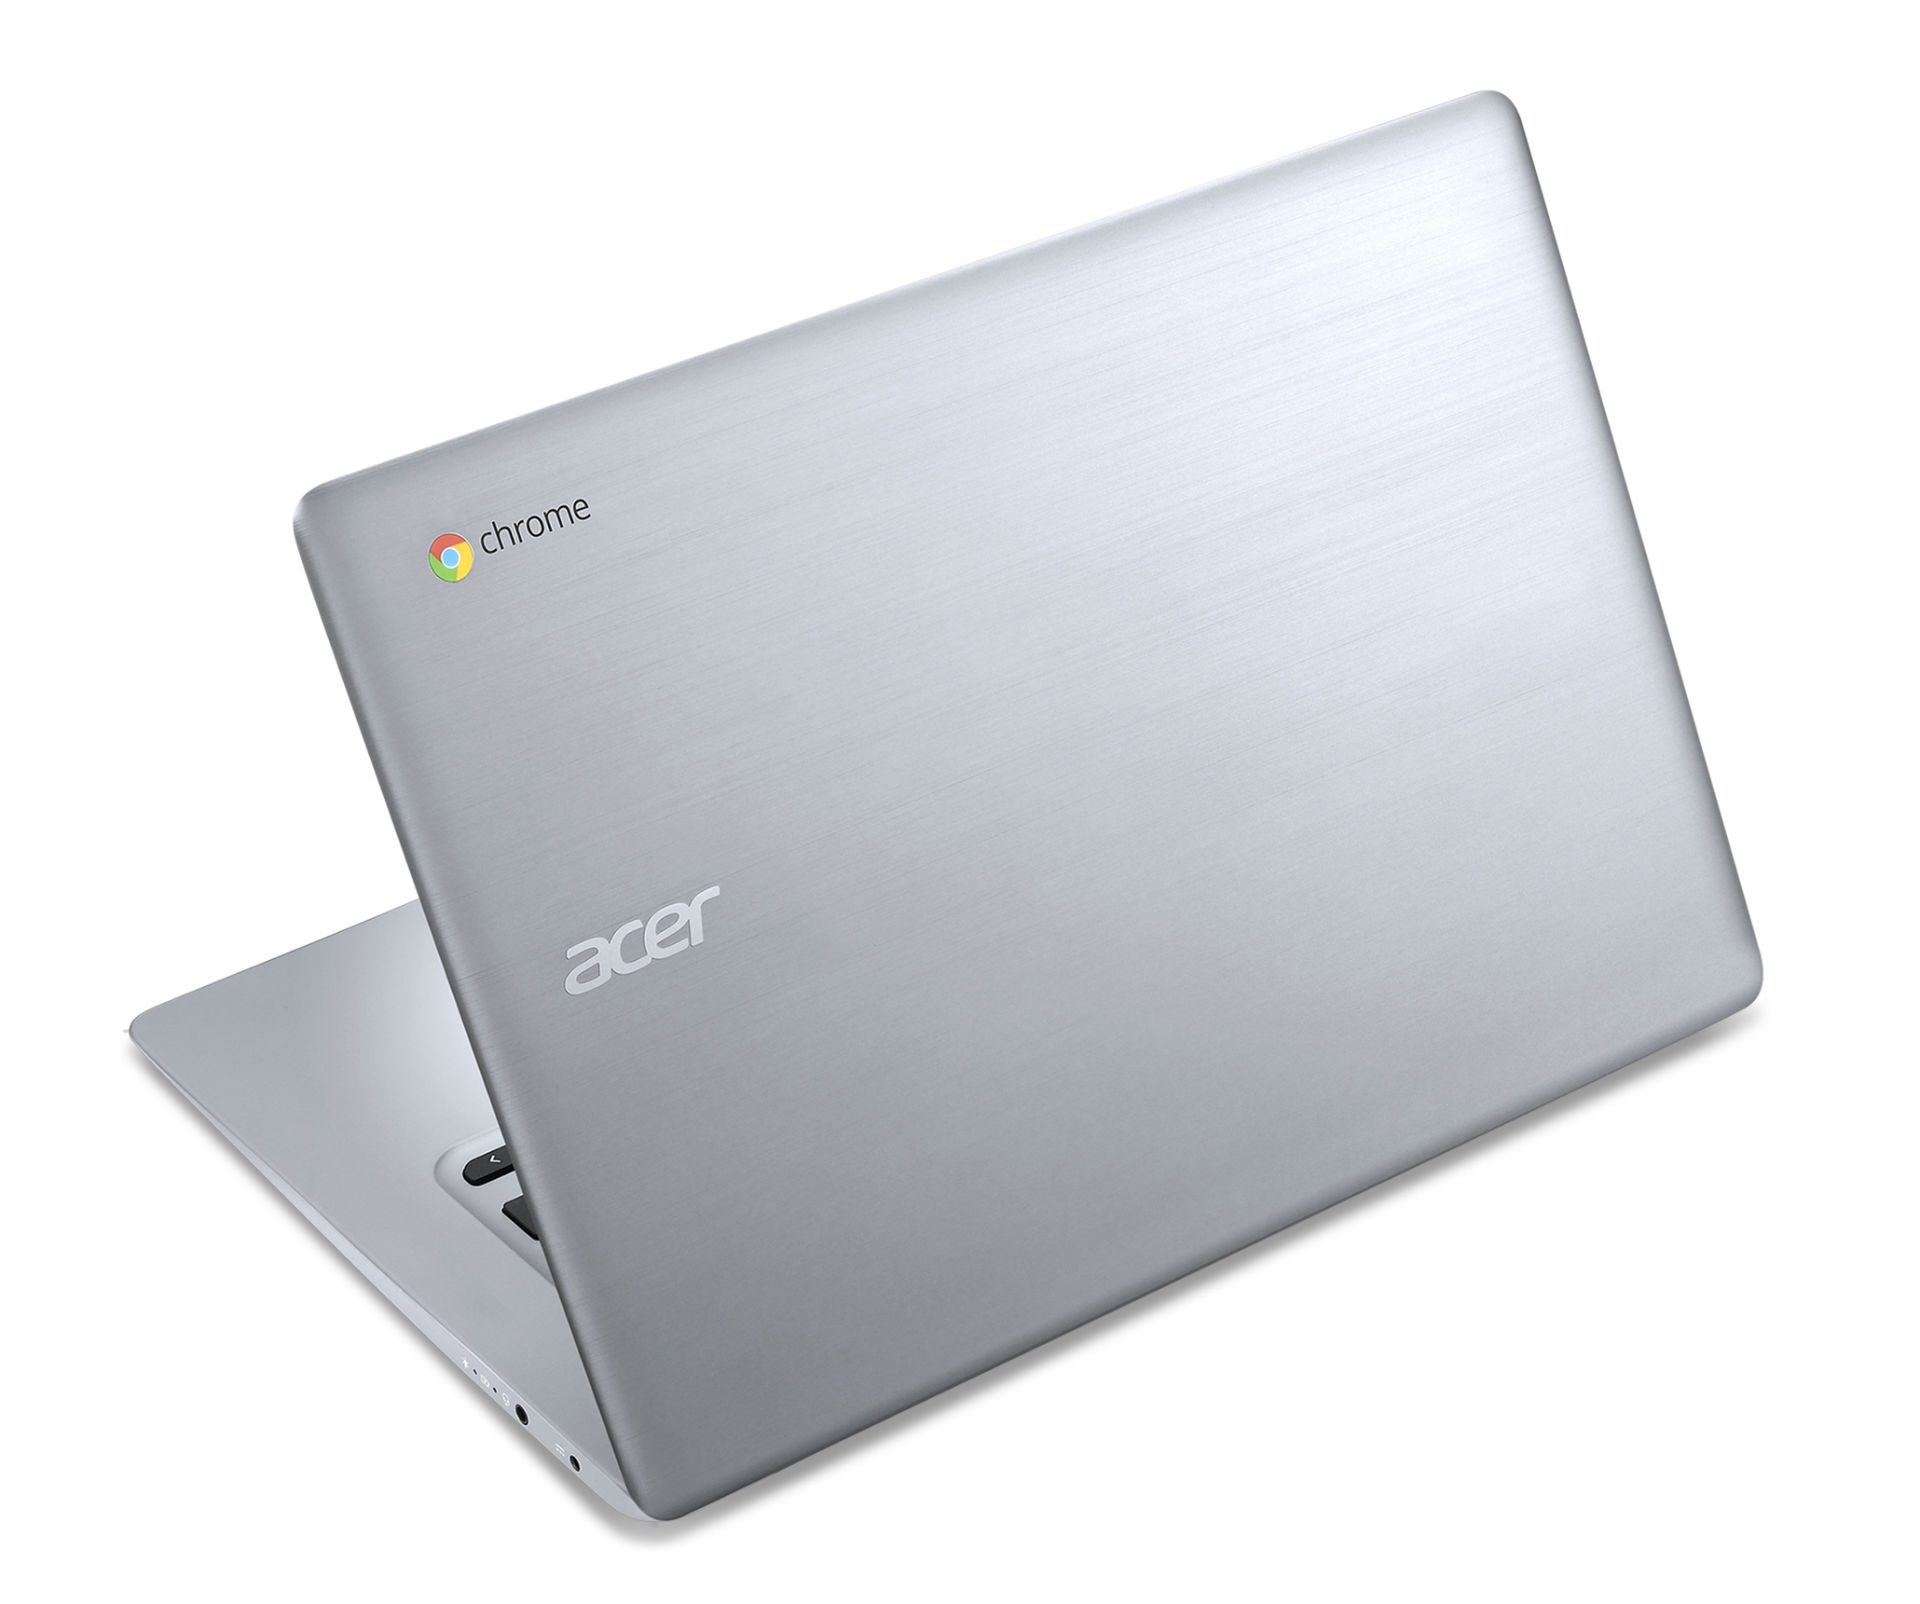 Newly launched Acer Chromebook 14